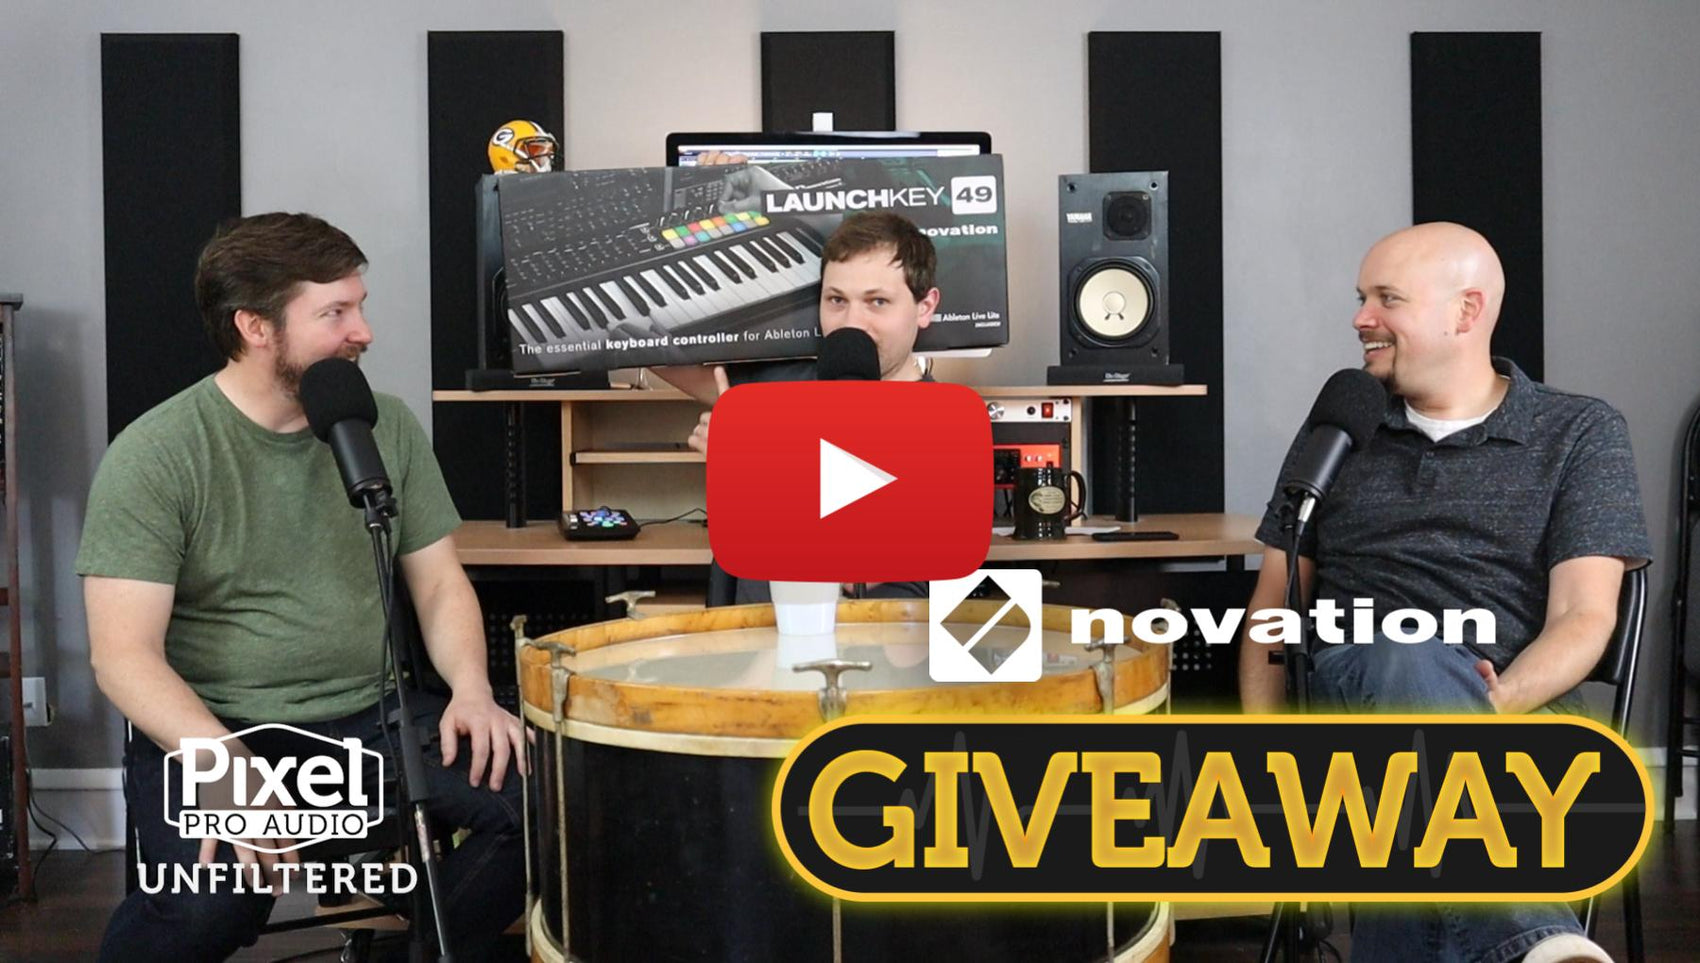 Want to Win a Novation Launchkey 49 RBG?